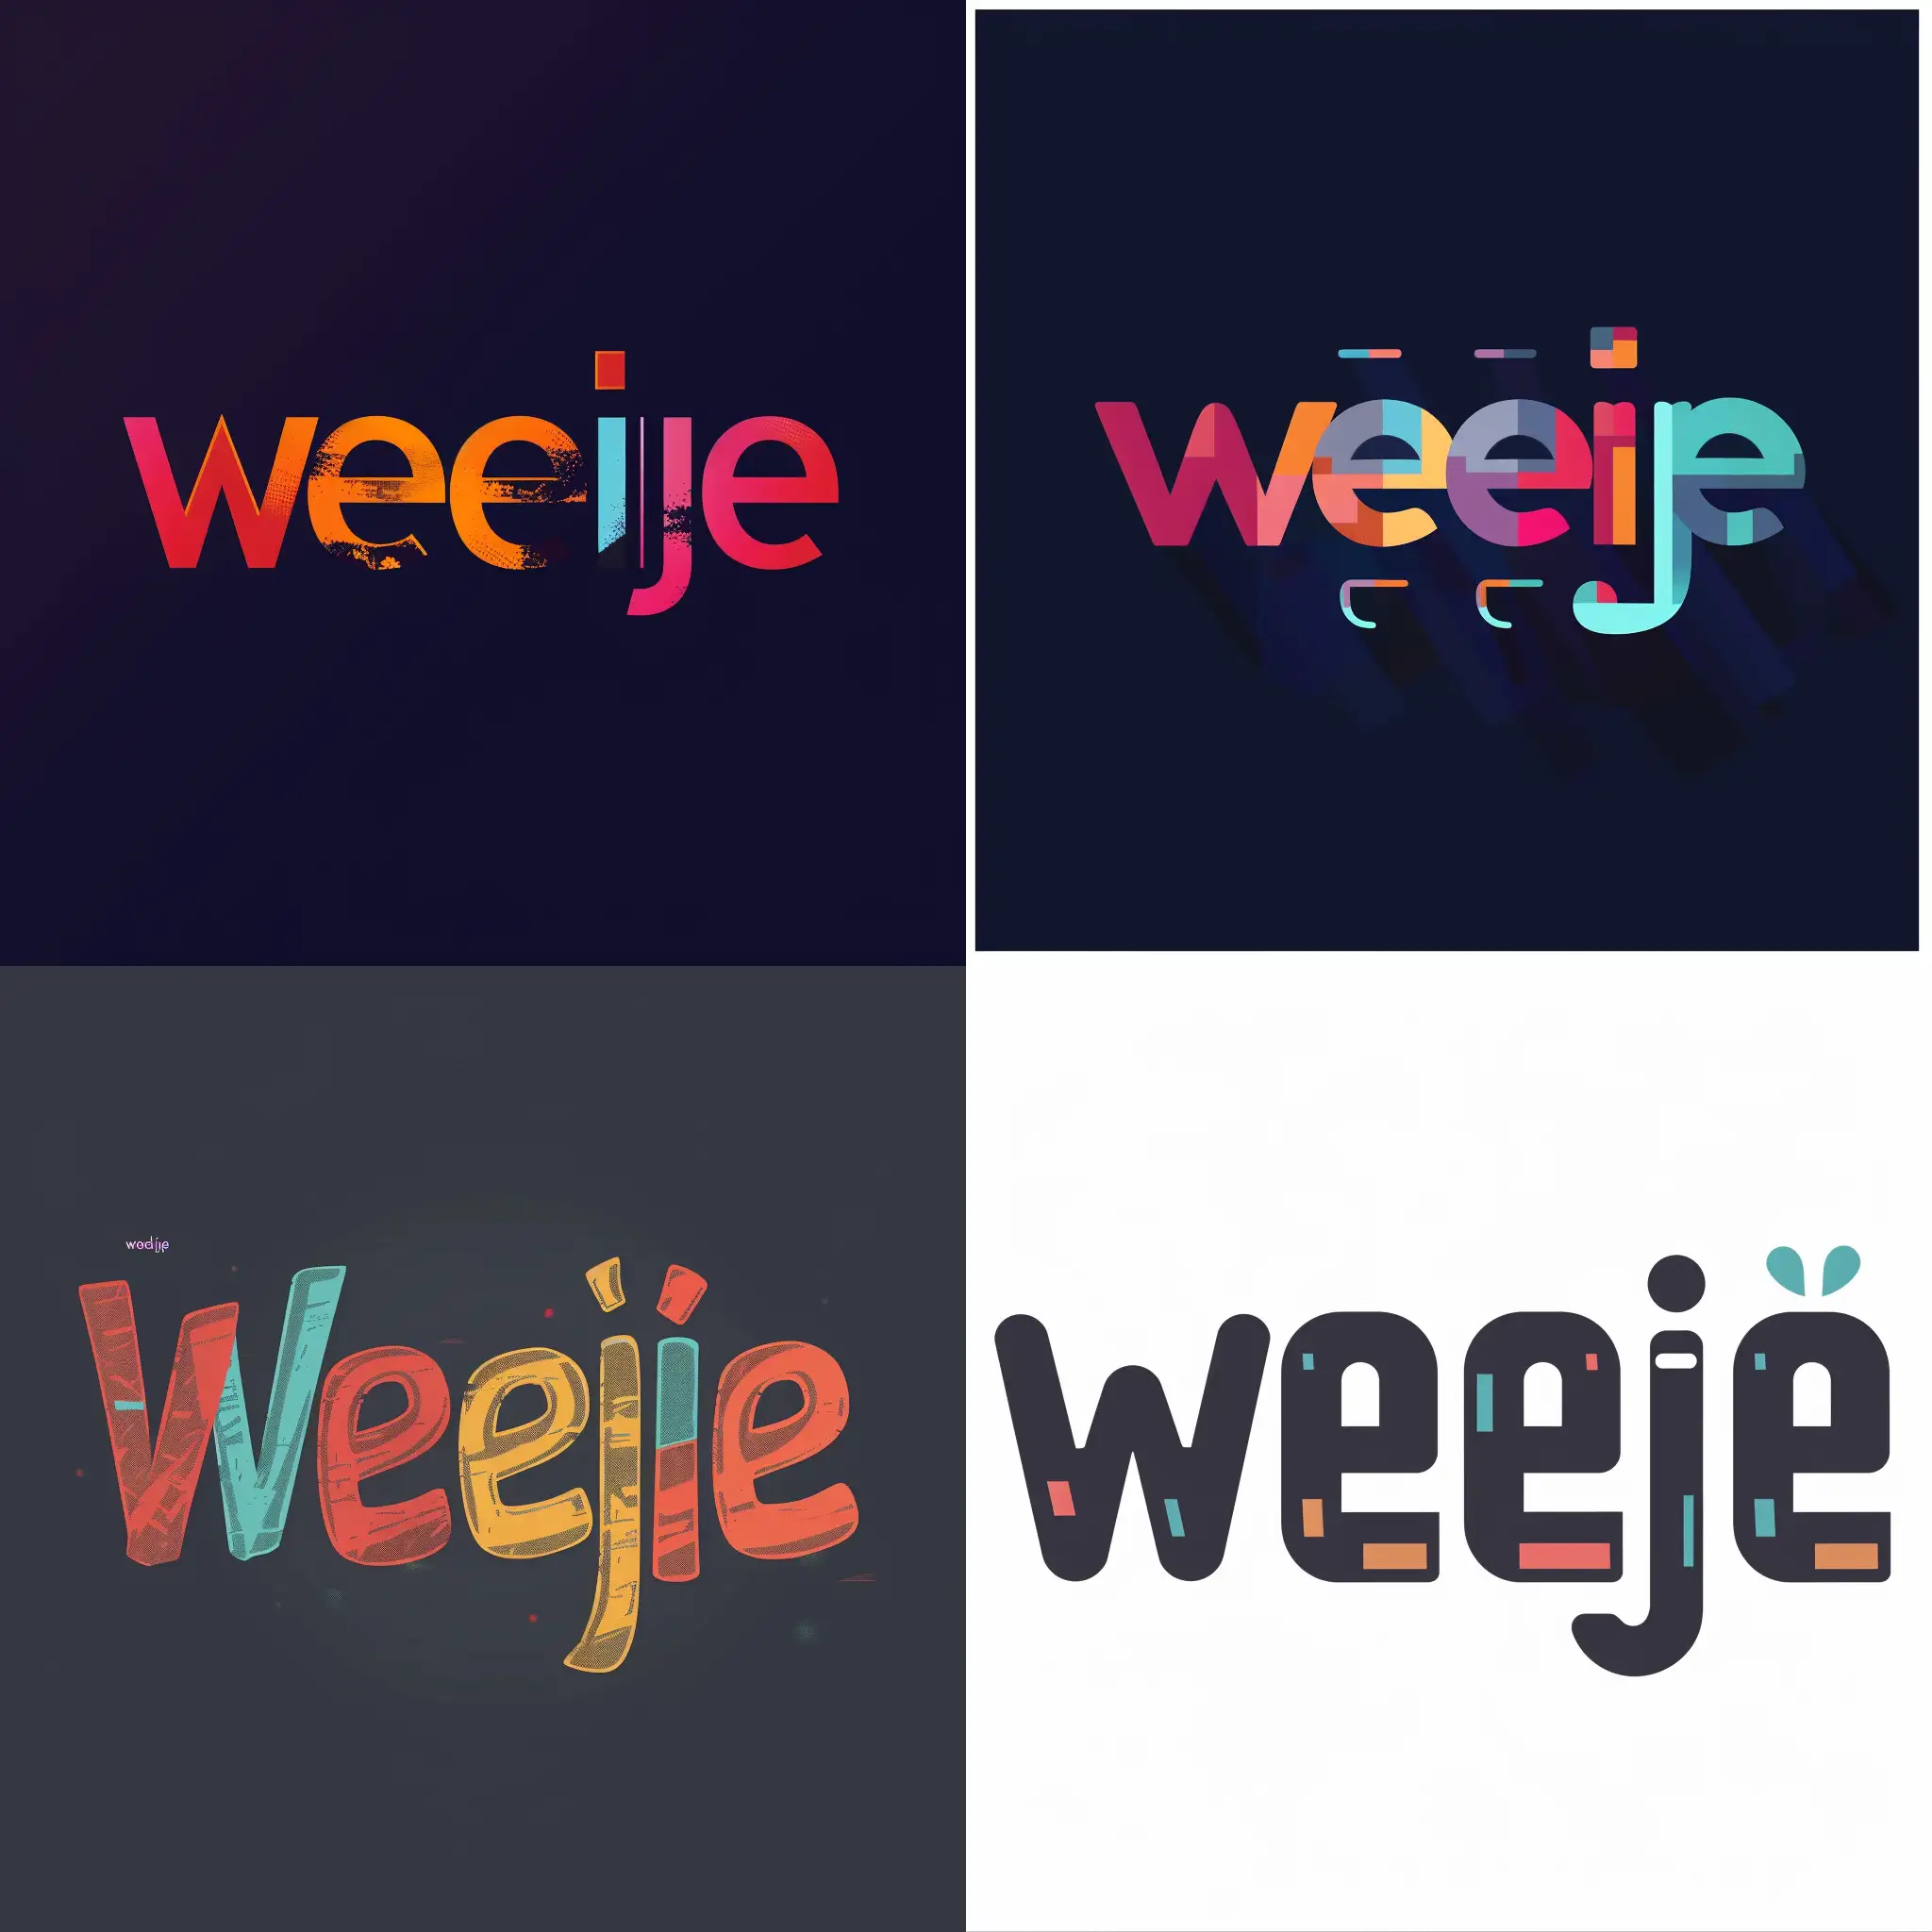 logo type for word 'webije' which is a web design agency